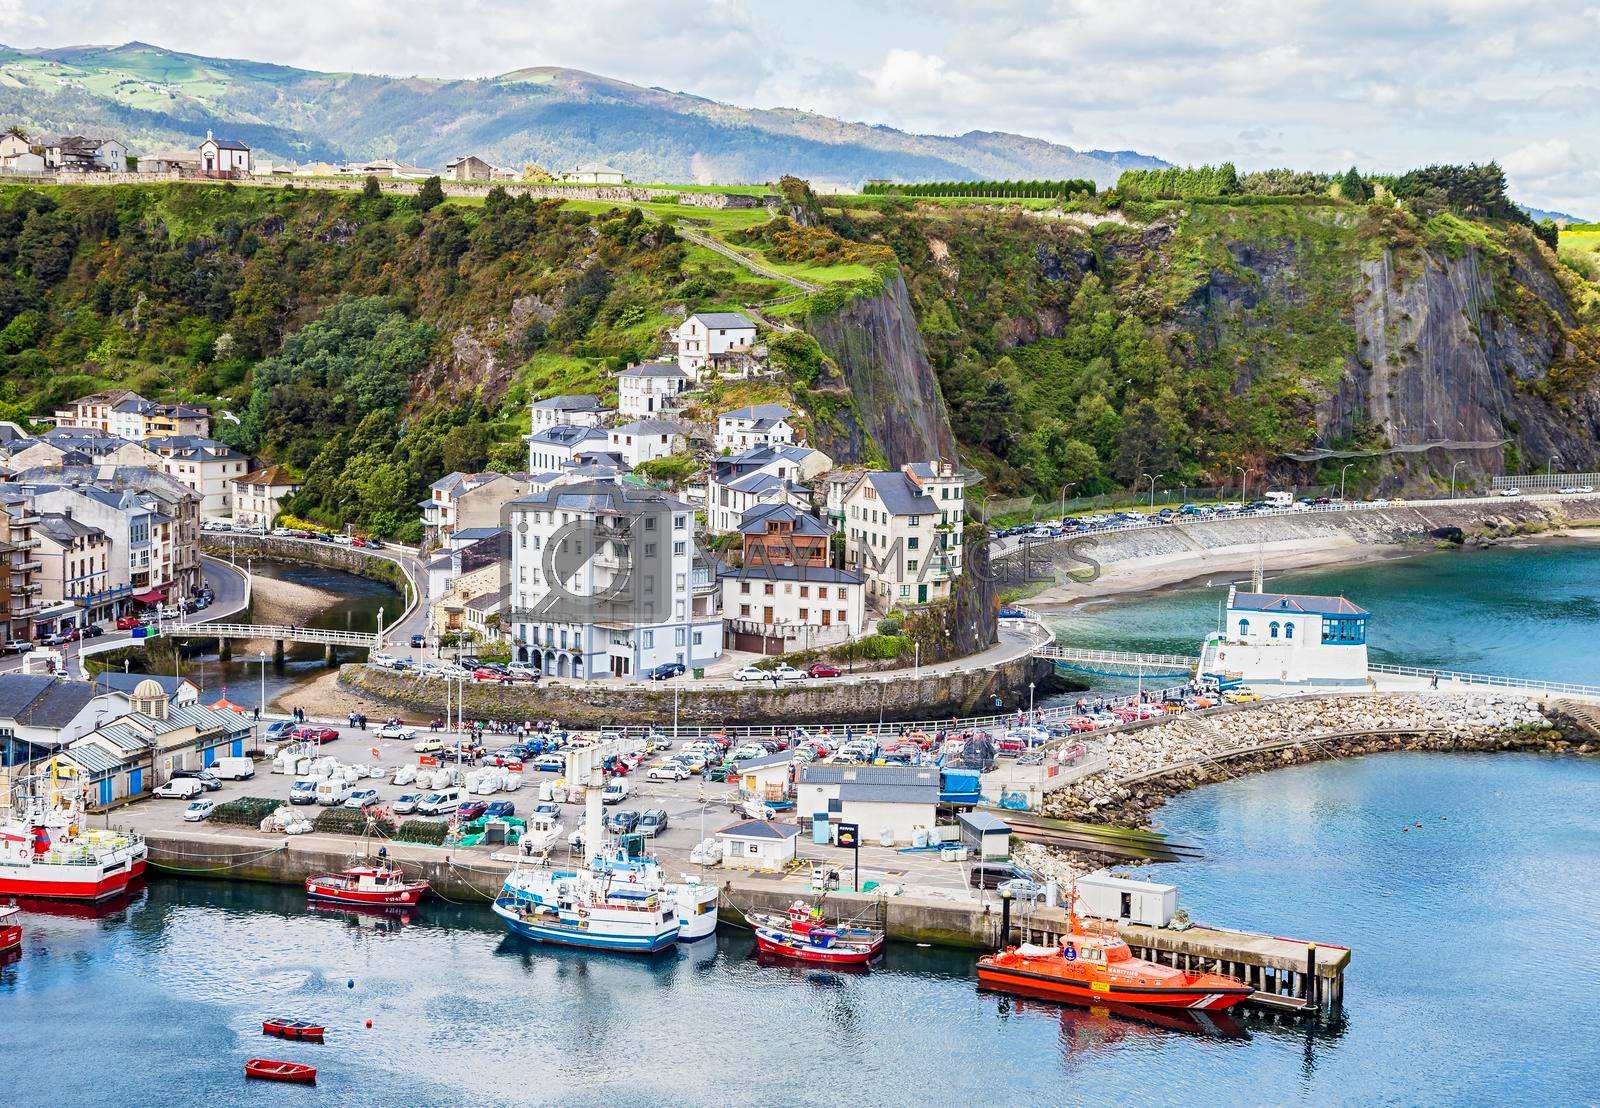 LUARCA, SPAIN - APRIL 25, 2015 - Seaport of Luarca, view from above